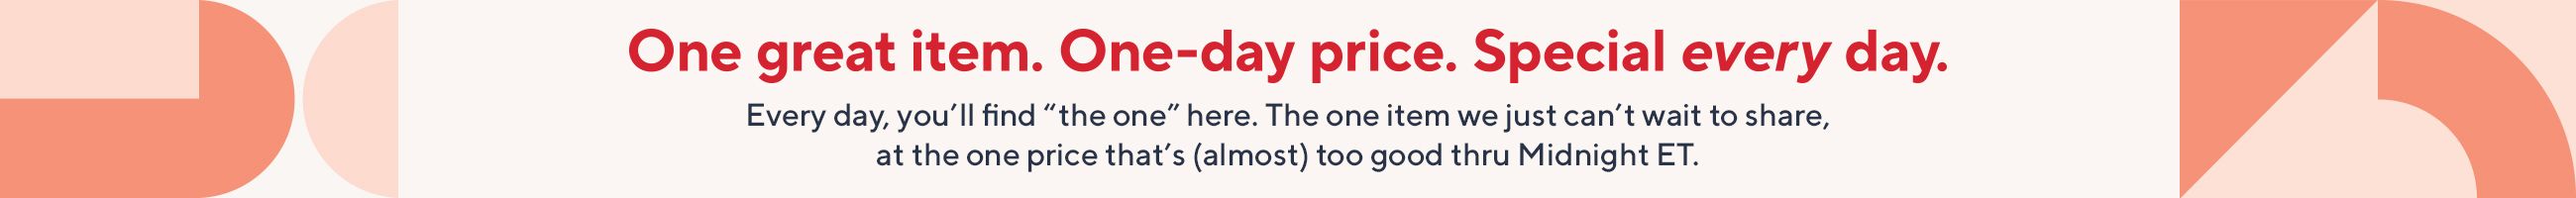 One great item. One-day price. Special every day. Every day, you'll find "the one" here. The one item we just can't wait to share, at the one price that's (almost) too good thru Midnight ET.